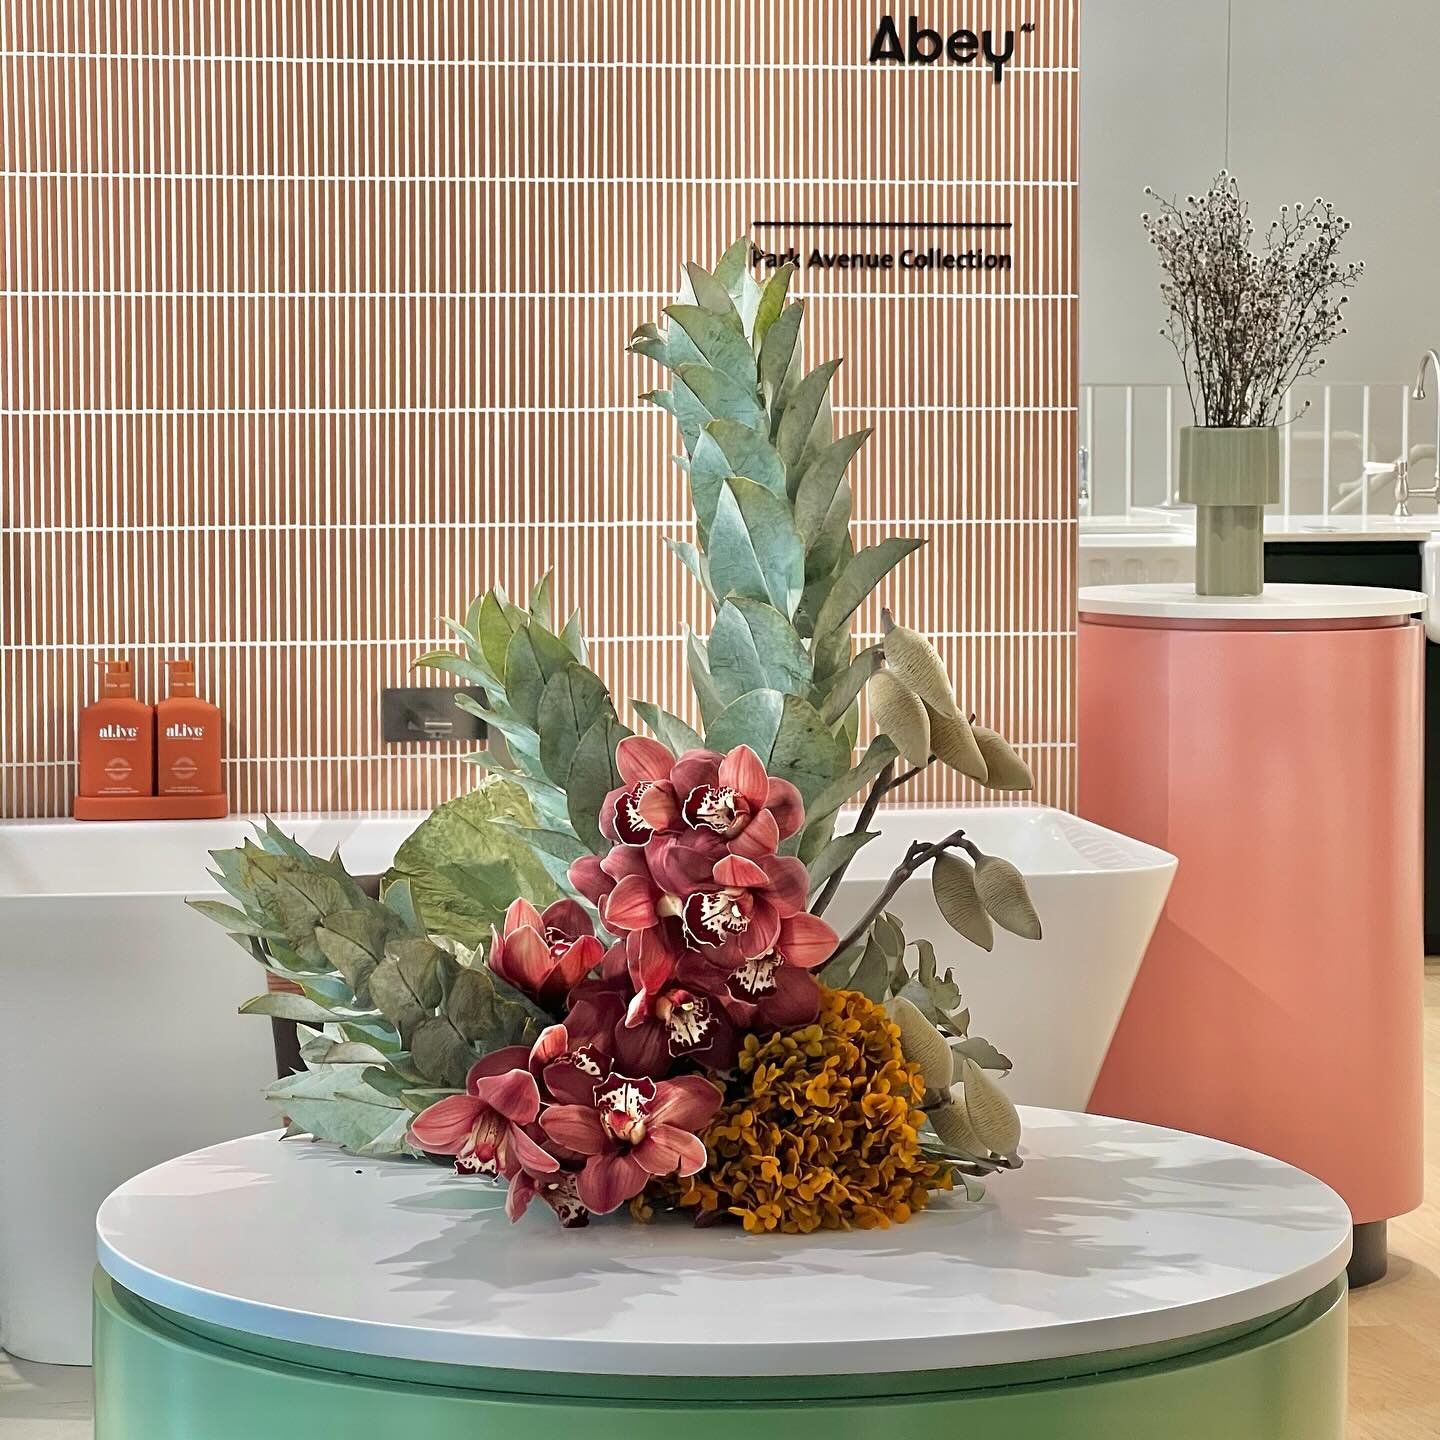 Looking for that bespoke floral touch for your office, showroom, activation or next event?

Whether you prefer a classic and elegant look or a modern and artistic approach, we have the expertise to tailor our creations to truly reflect the essence of